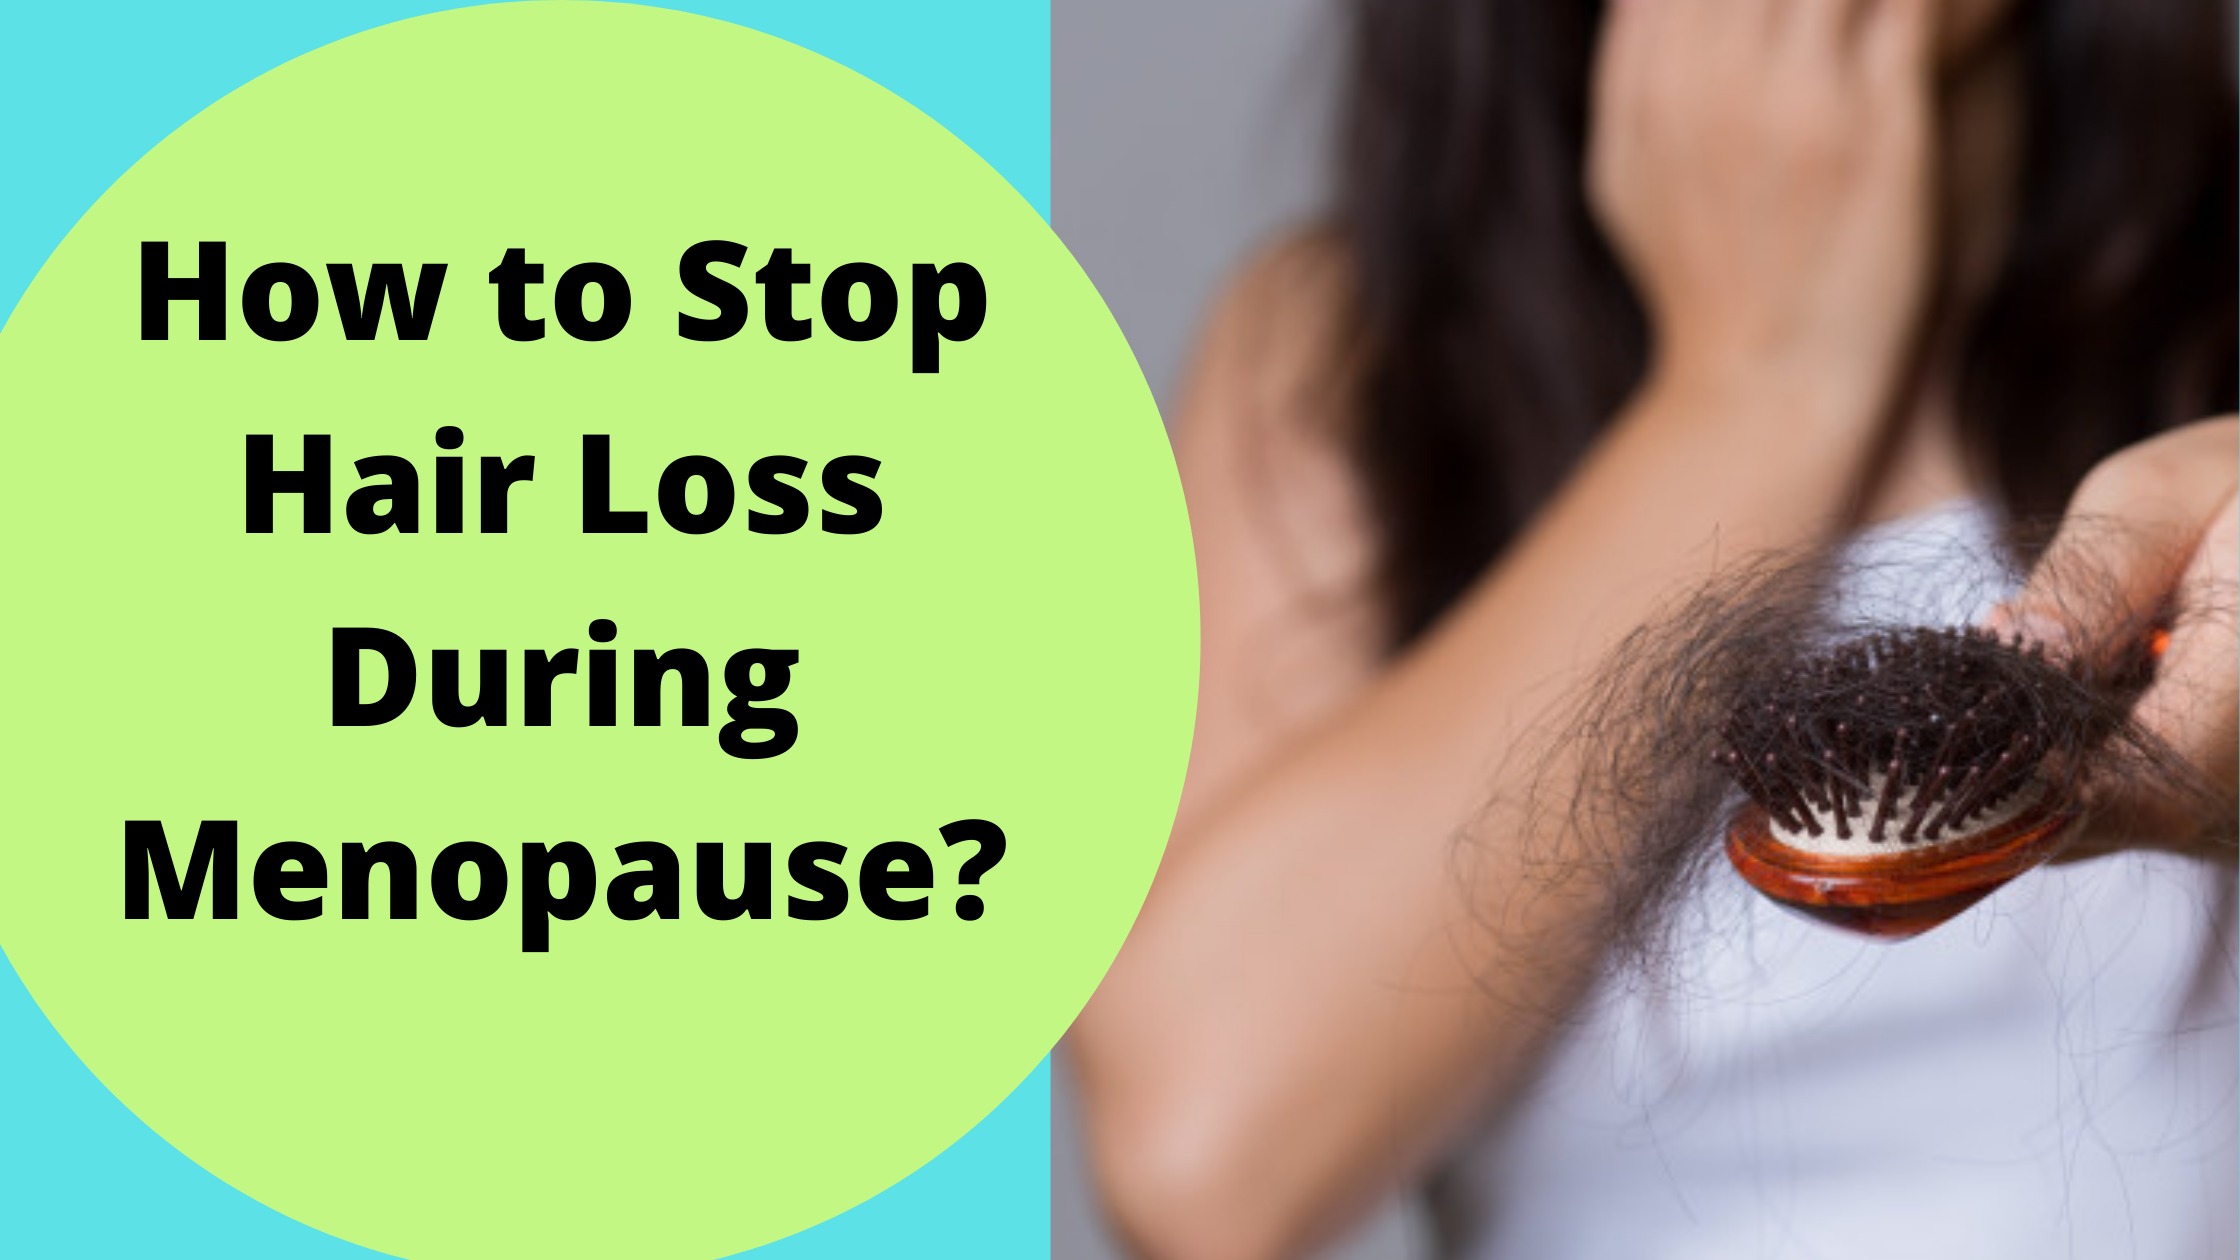 How to Stop Hair Loss During Menopause